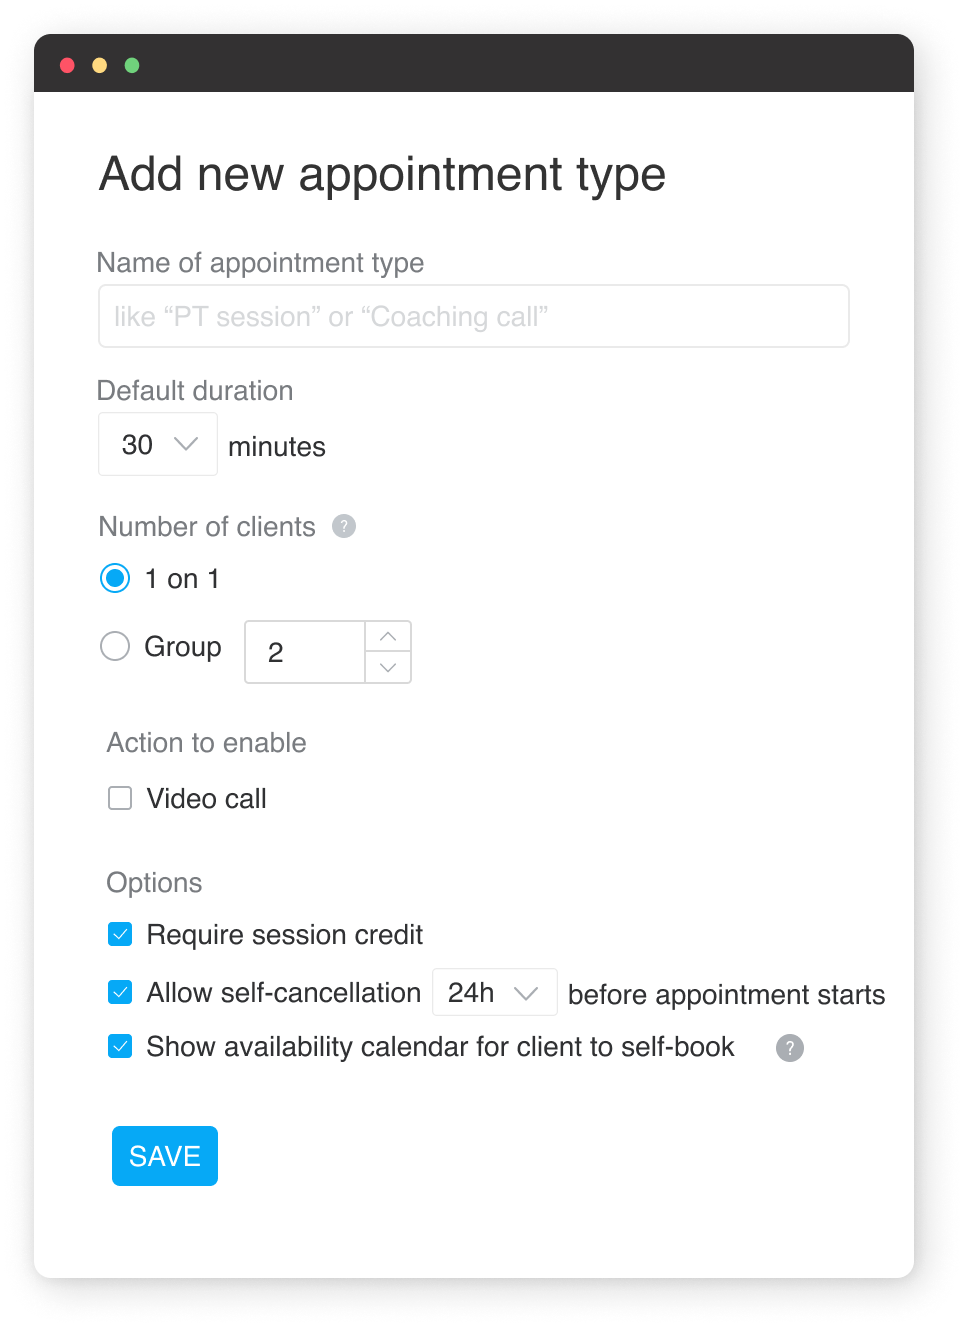 Add a new appointment type